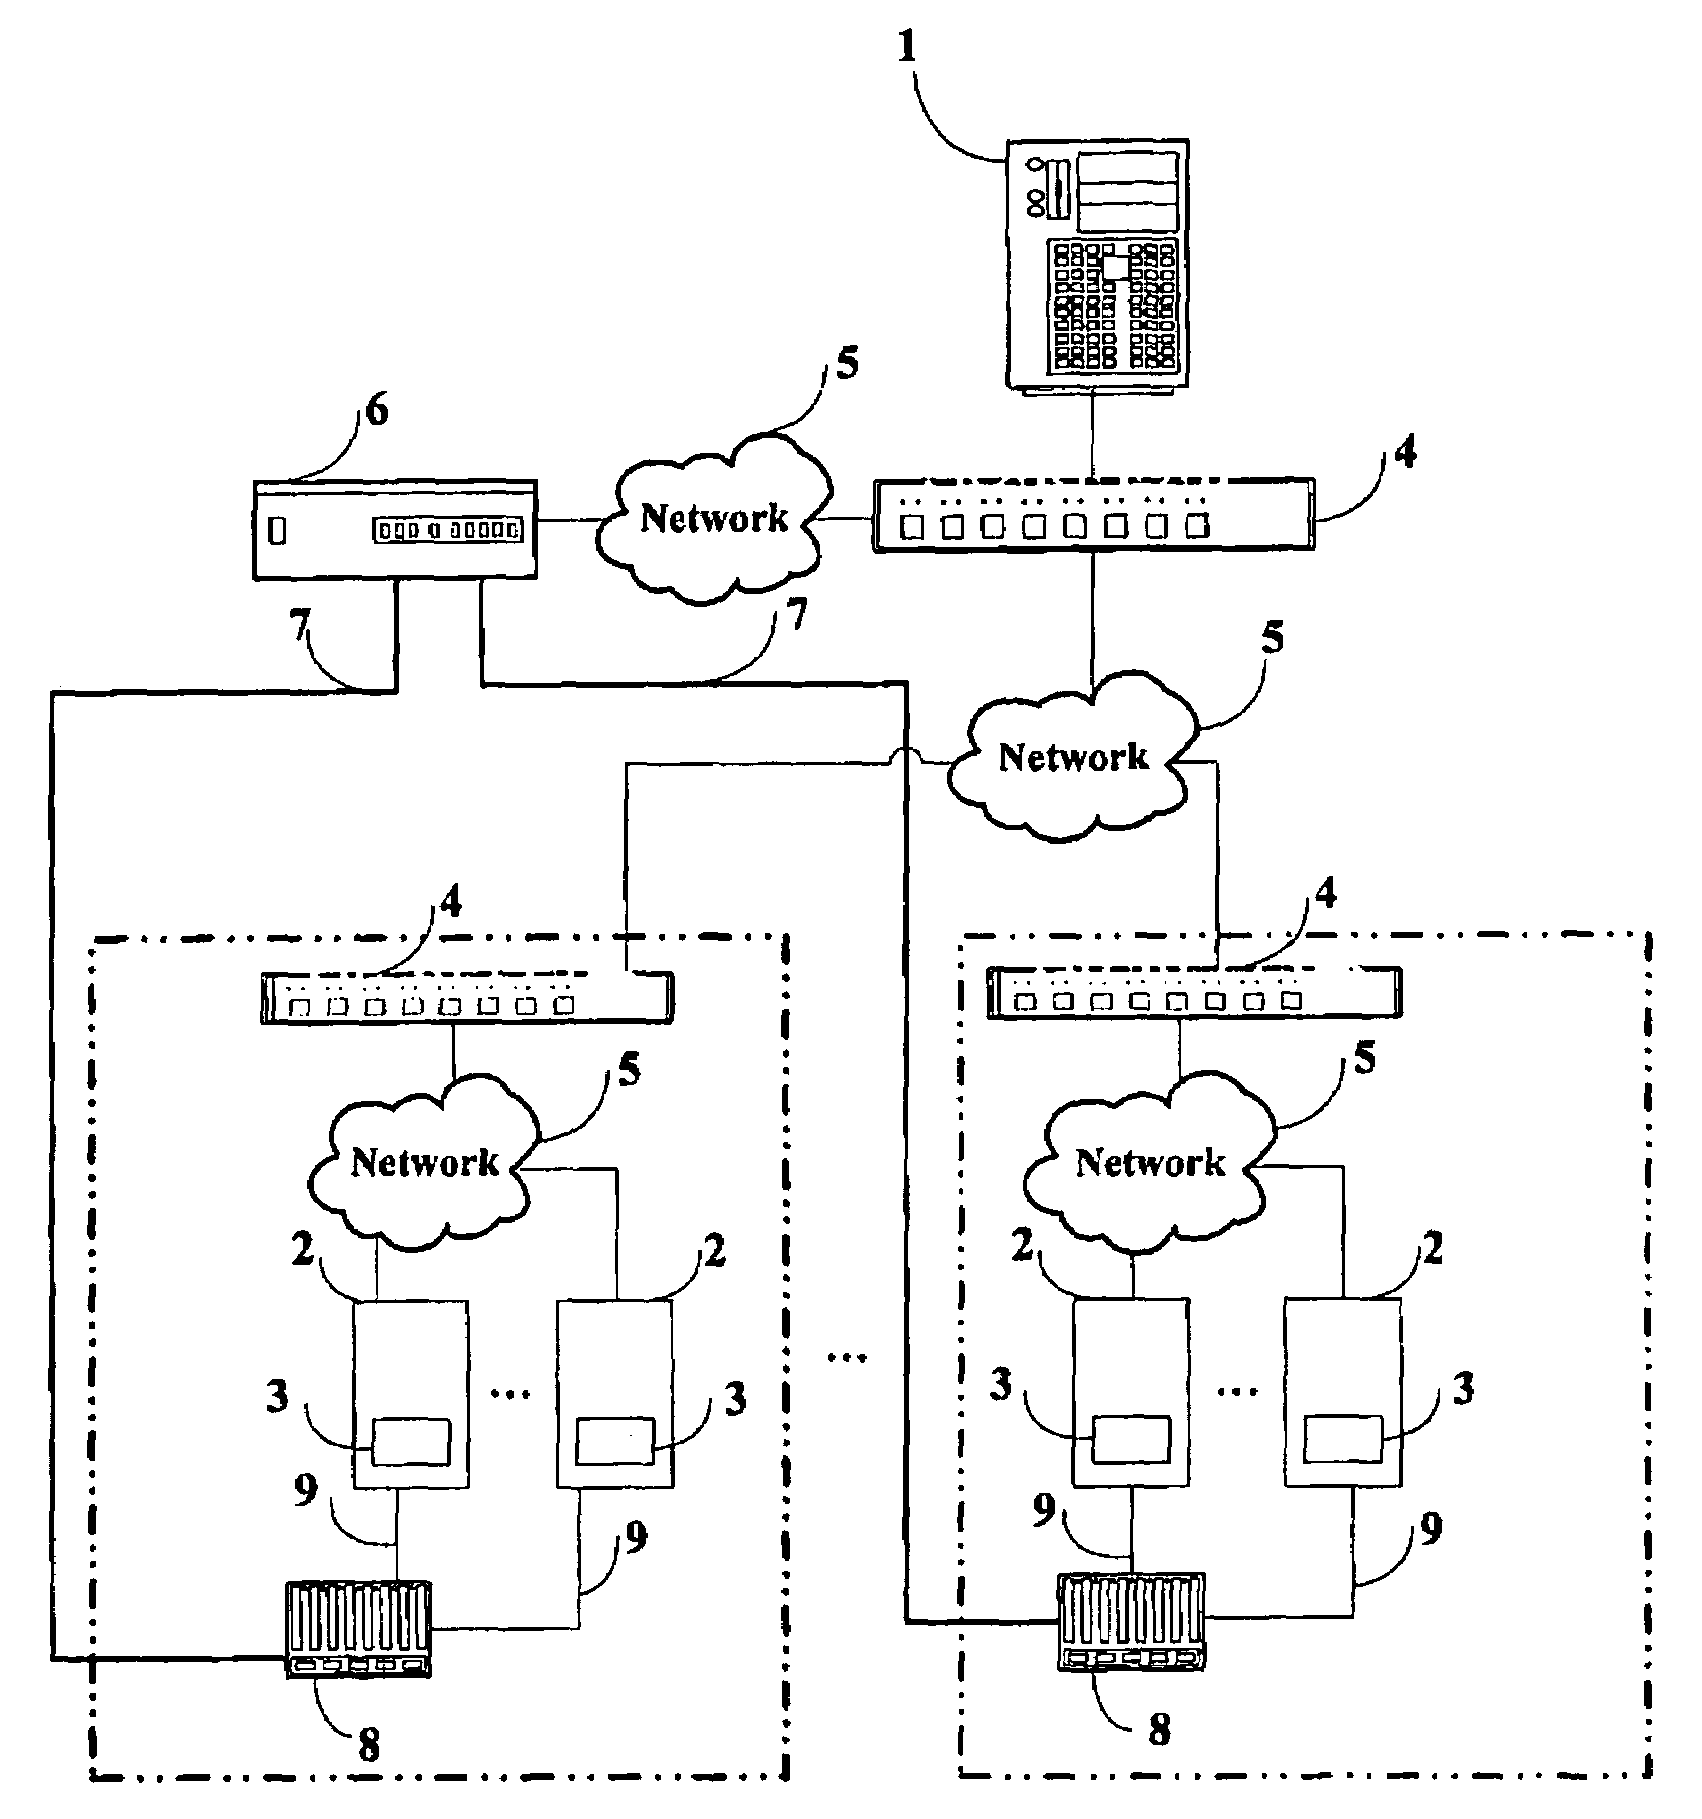 System and method for automatically testing motherboards